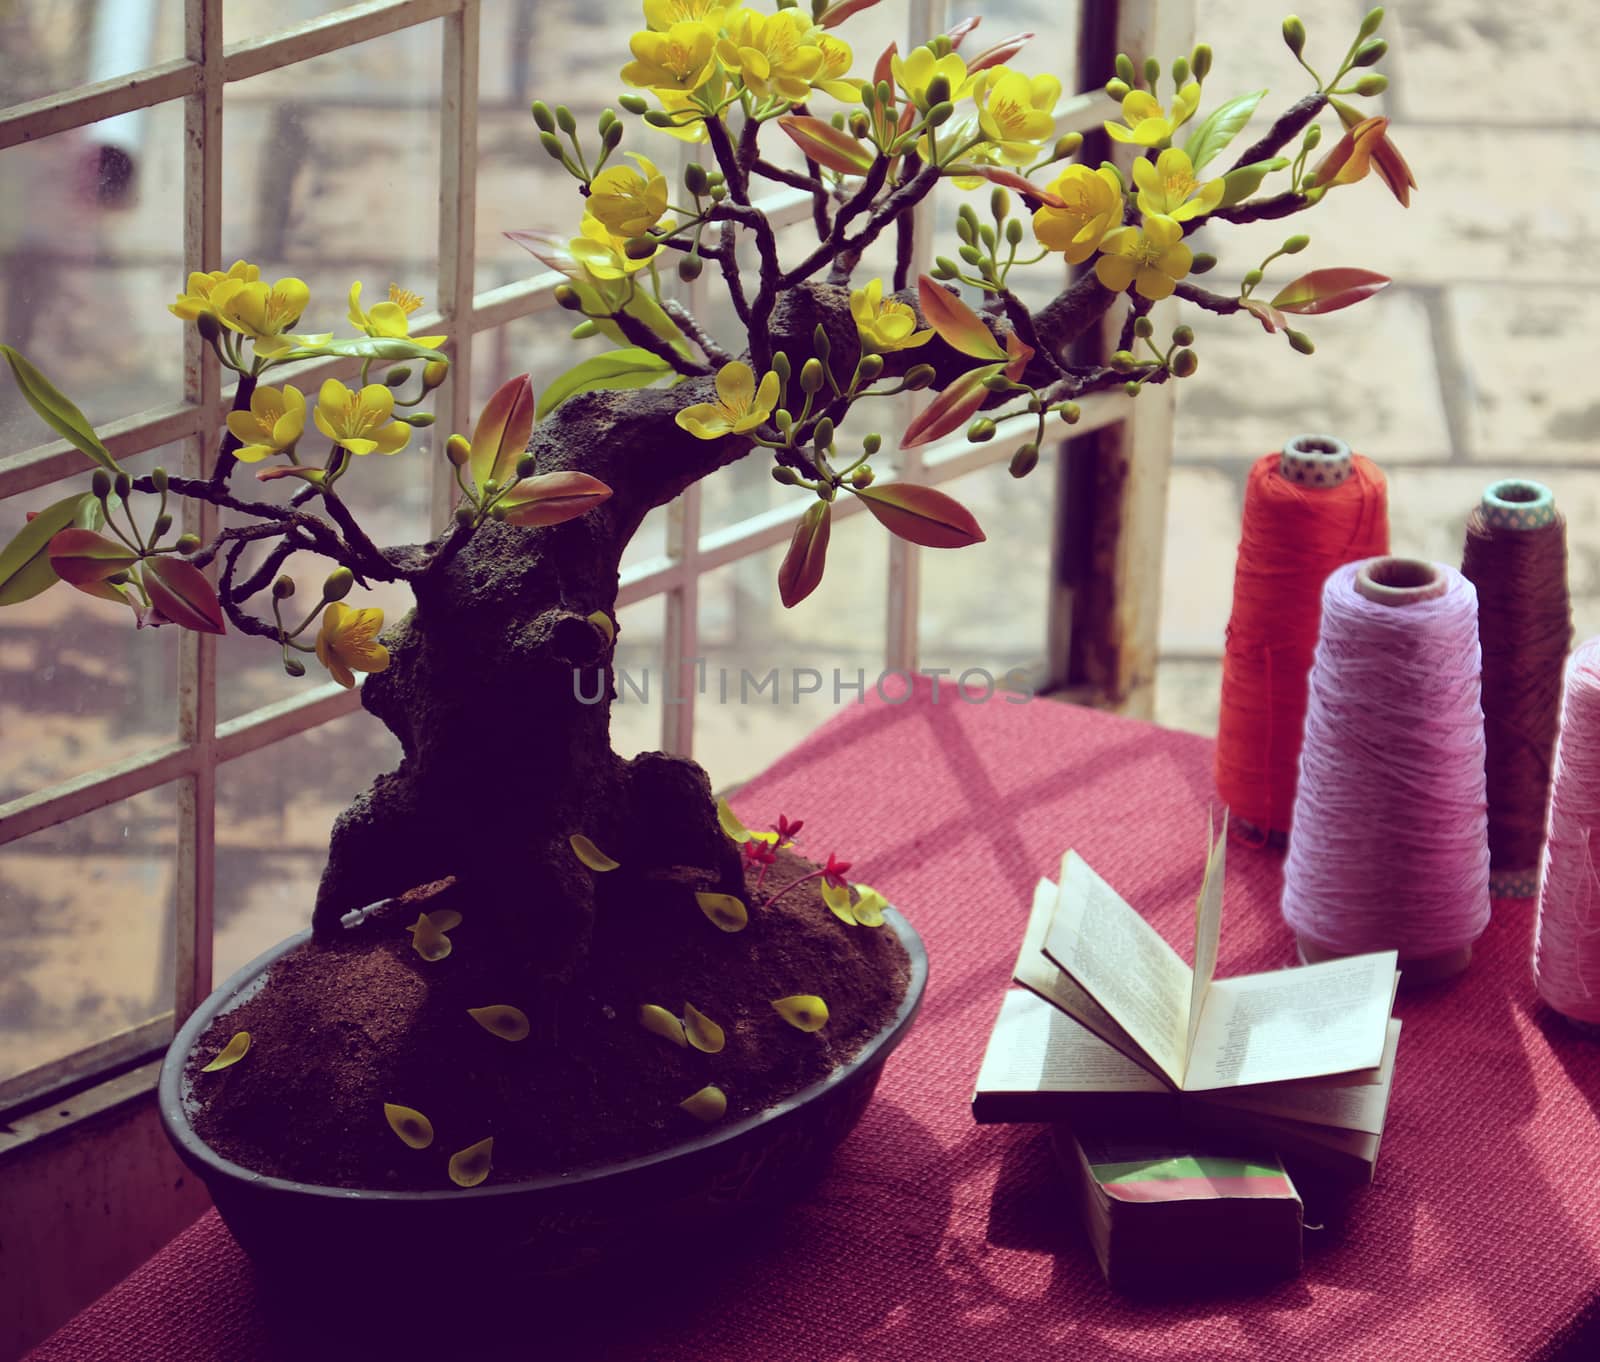 Study space at home near window in springtime with apricot blossom pot and book on desk, nice artificial flower to decor